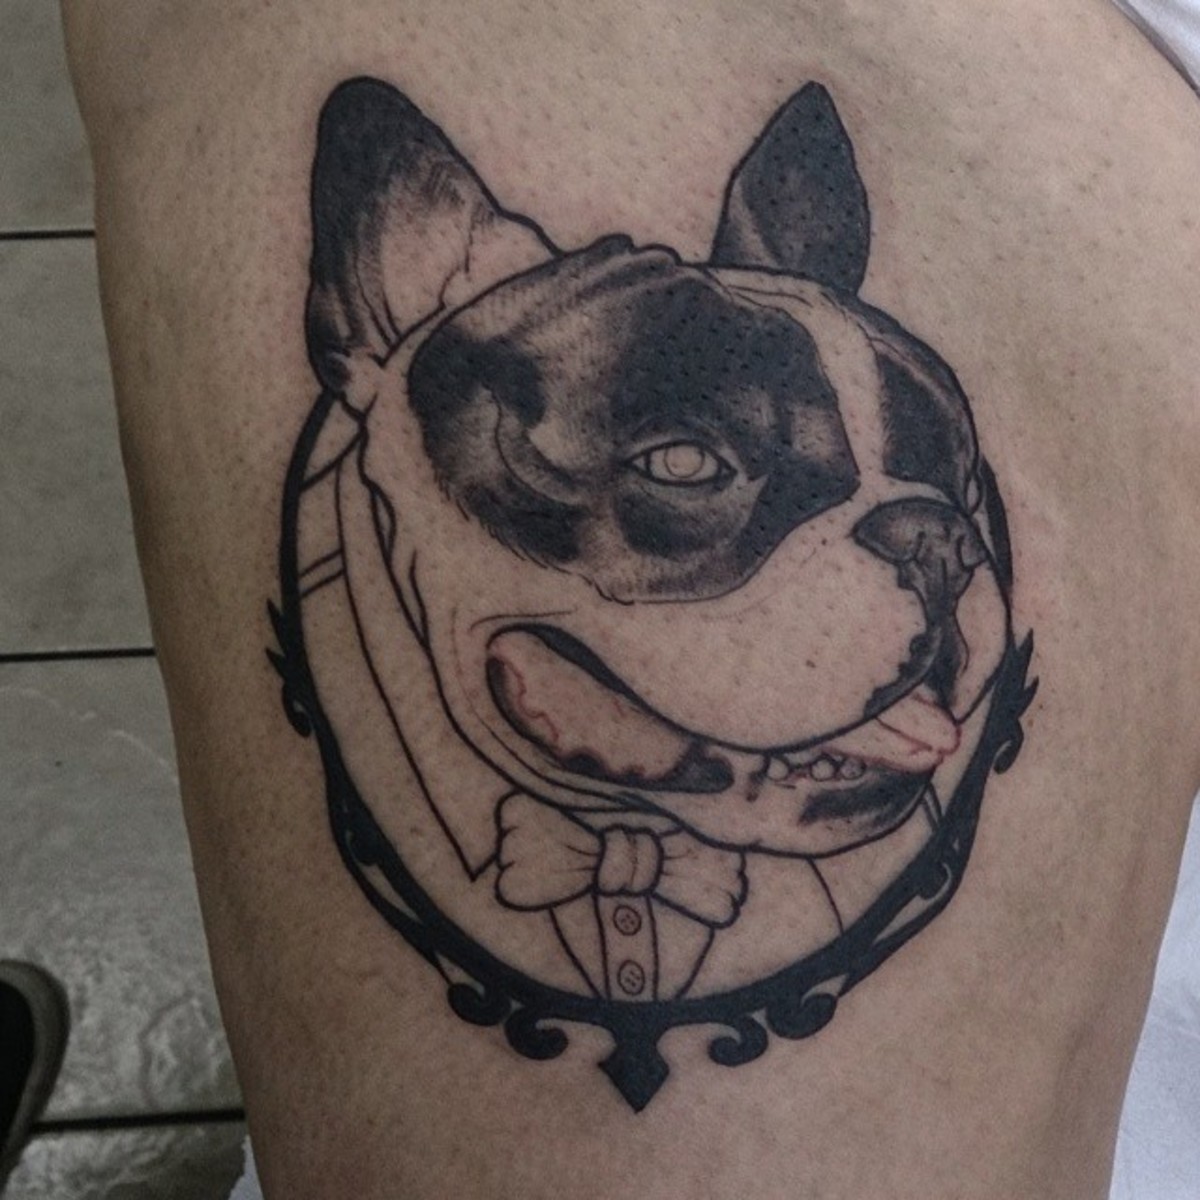 All about the bulldog tattoo.